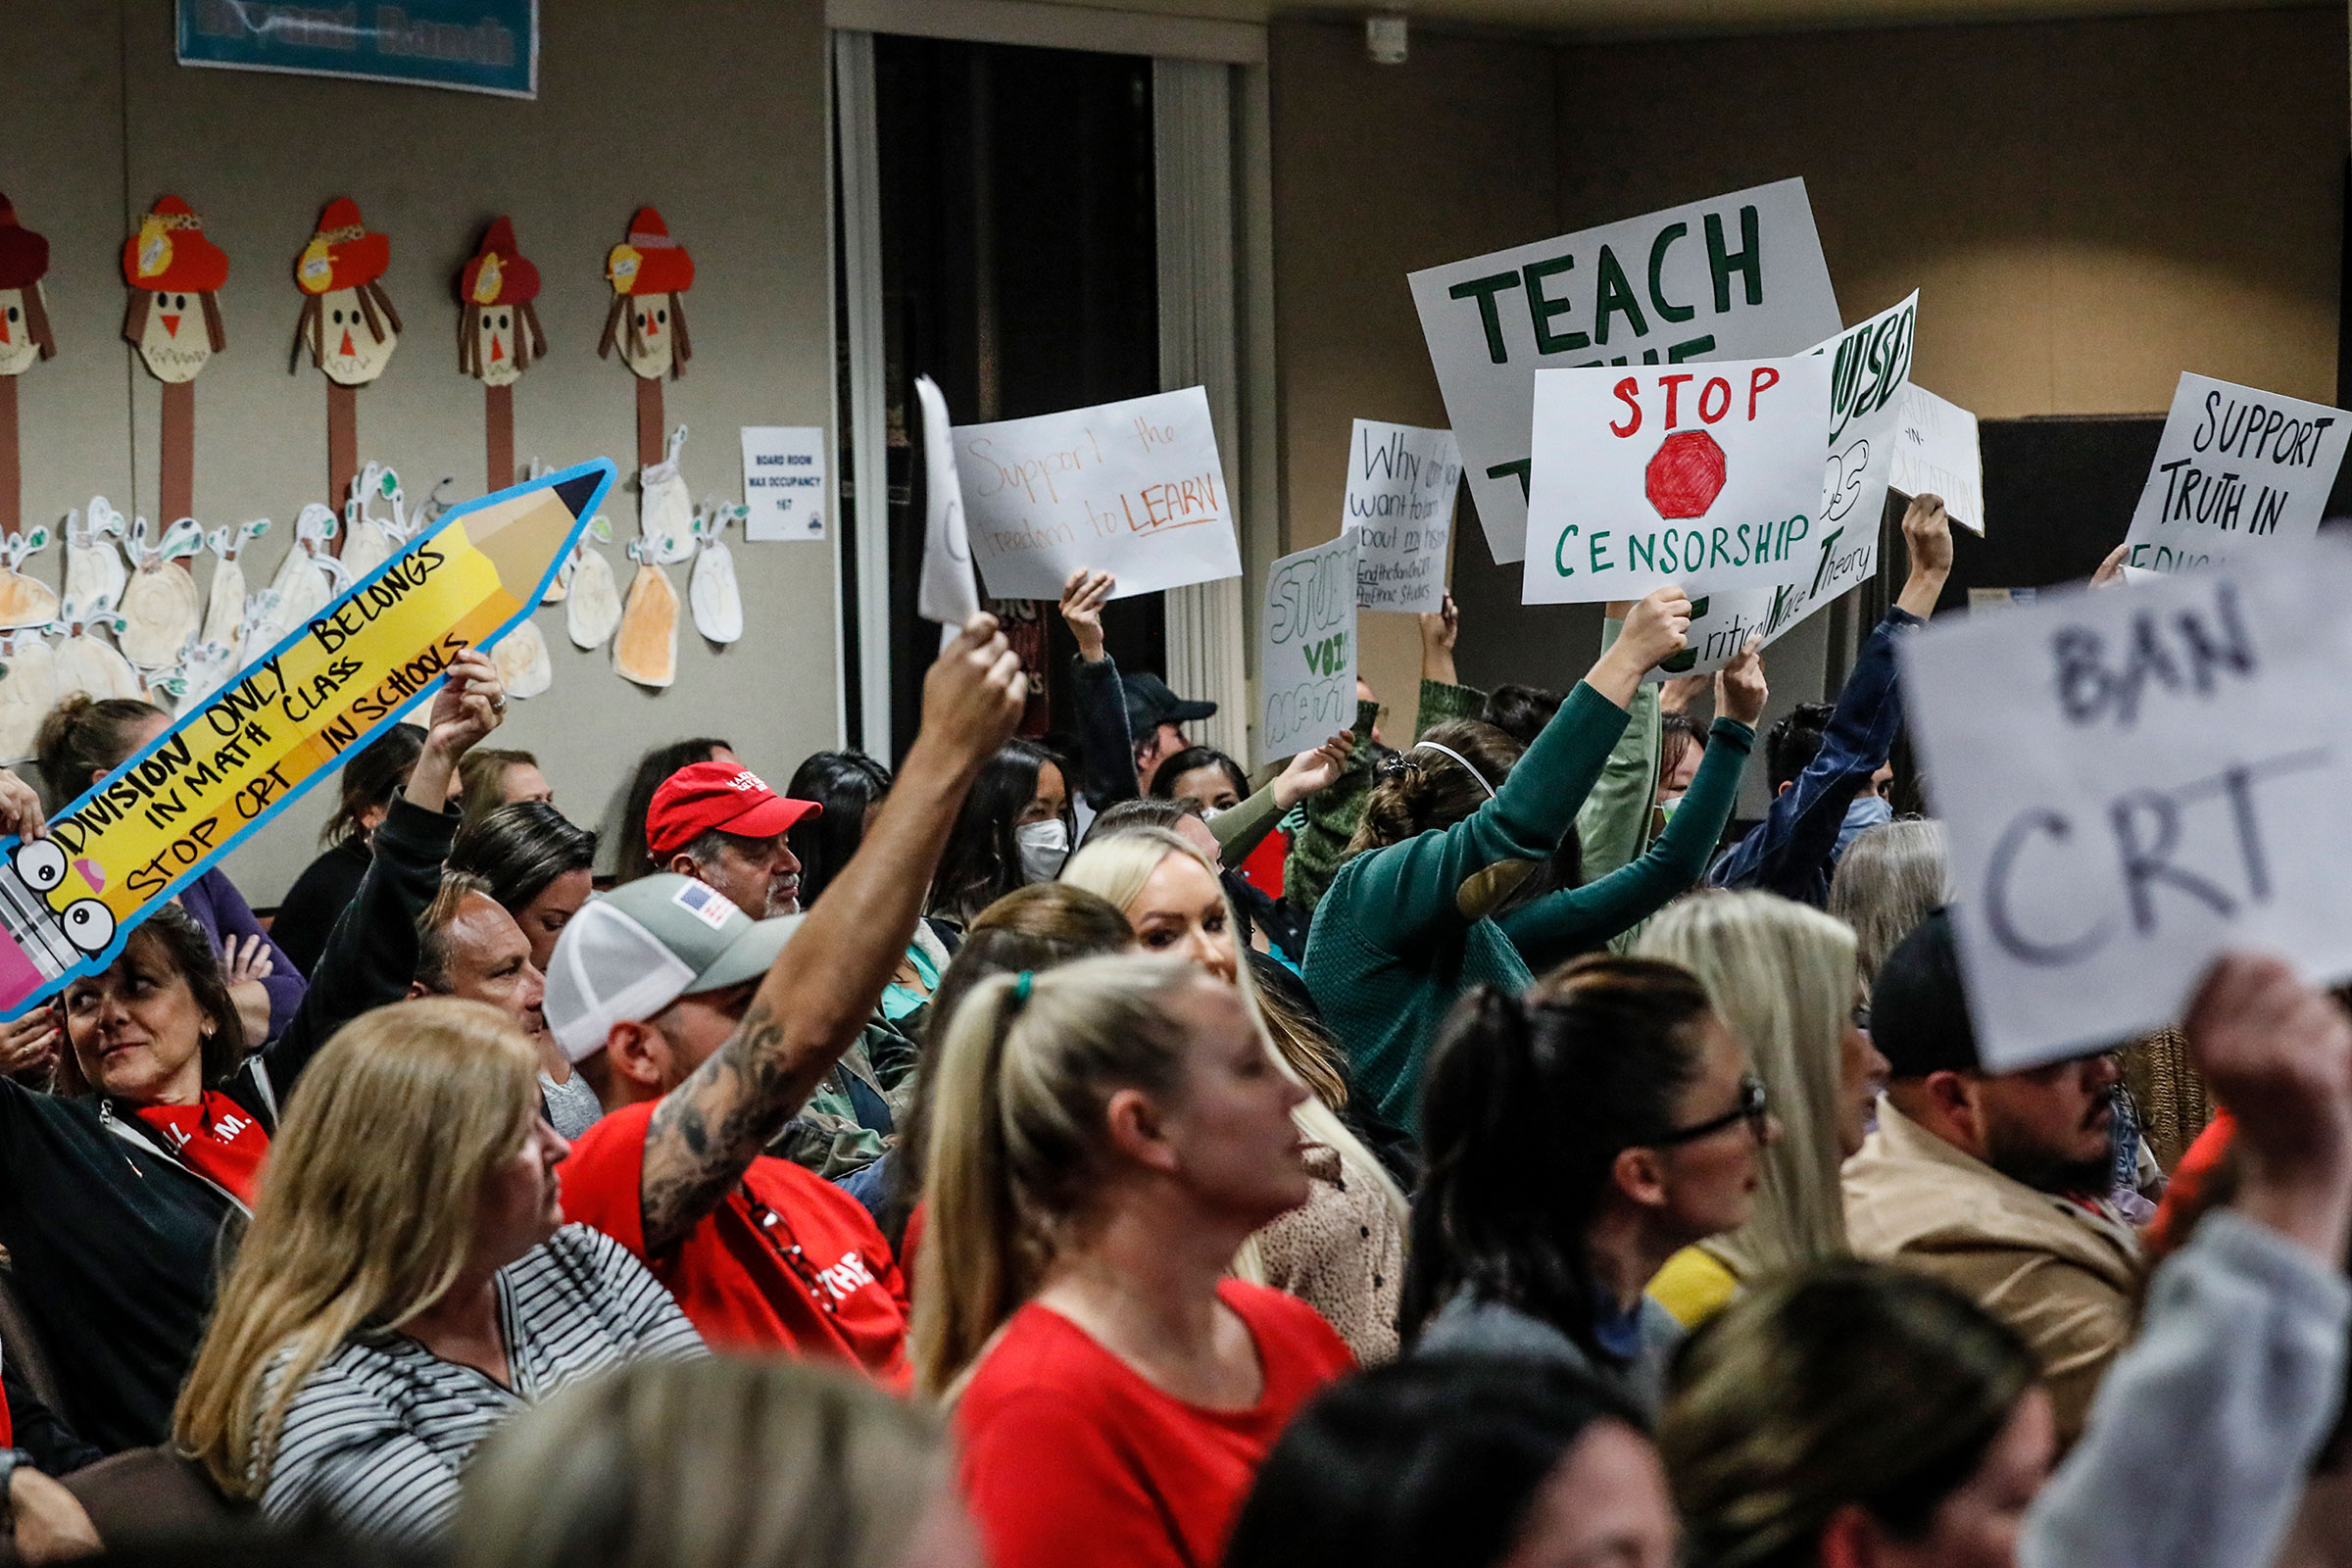 A mix of proponents and opponents to teaching Critical Race Theory are in attendance as the Placentia Yorba Linda School Board discusses a proposed resolution to ban it from being taught in schools in Yorba Linda, Calif. on Nov. 16, 2021. (Robert Gauthier—Los Angeles Times/Getty Images)